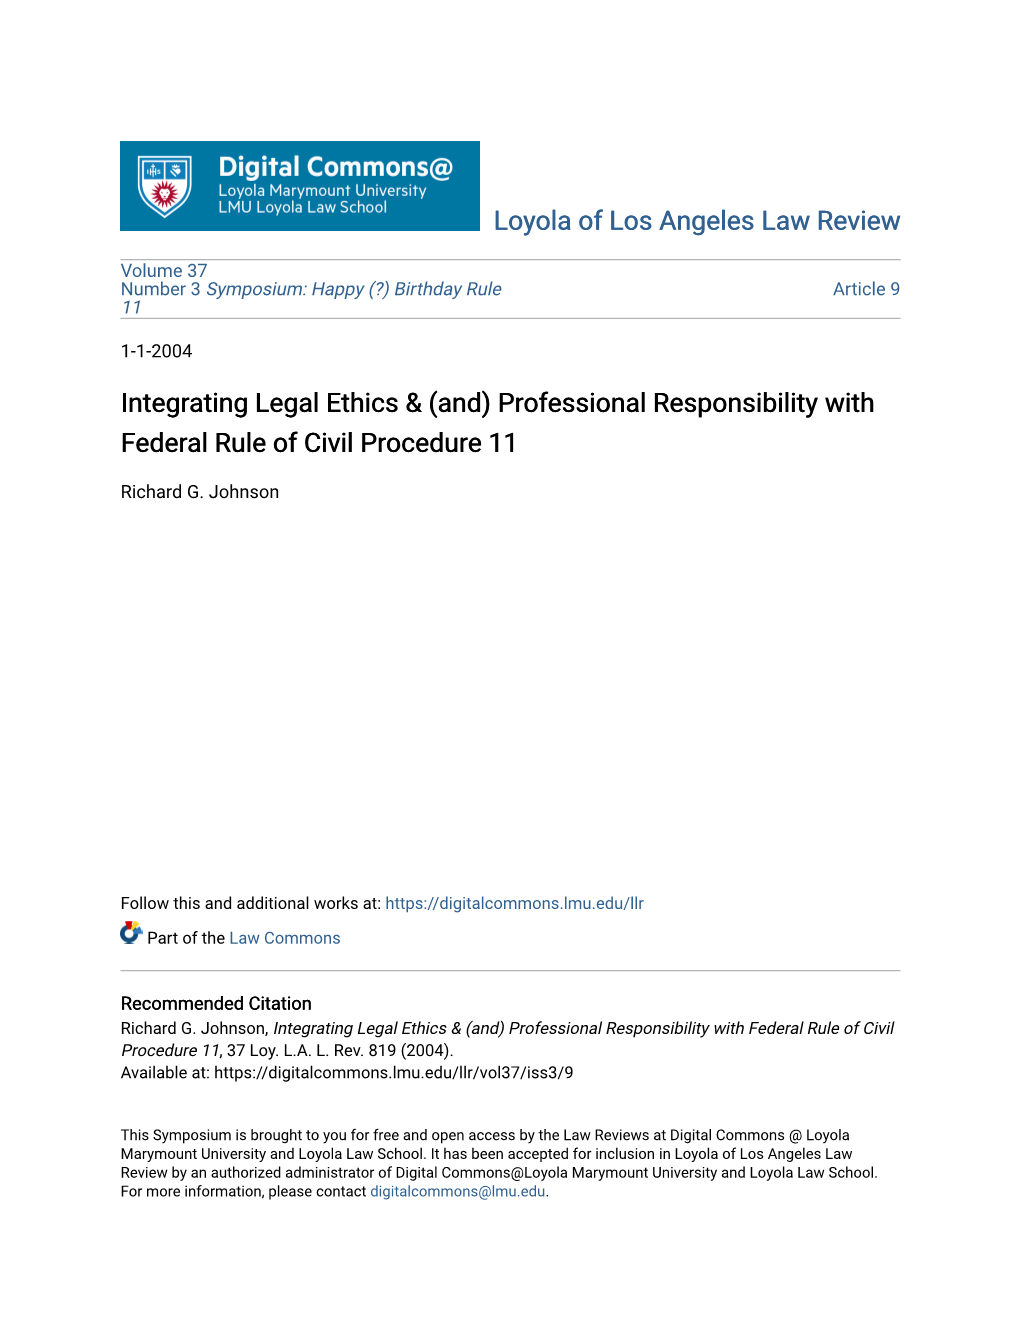 Professional Responsibility with Federal Rule of Civil Procedure 11